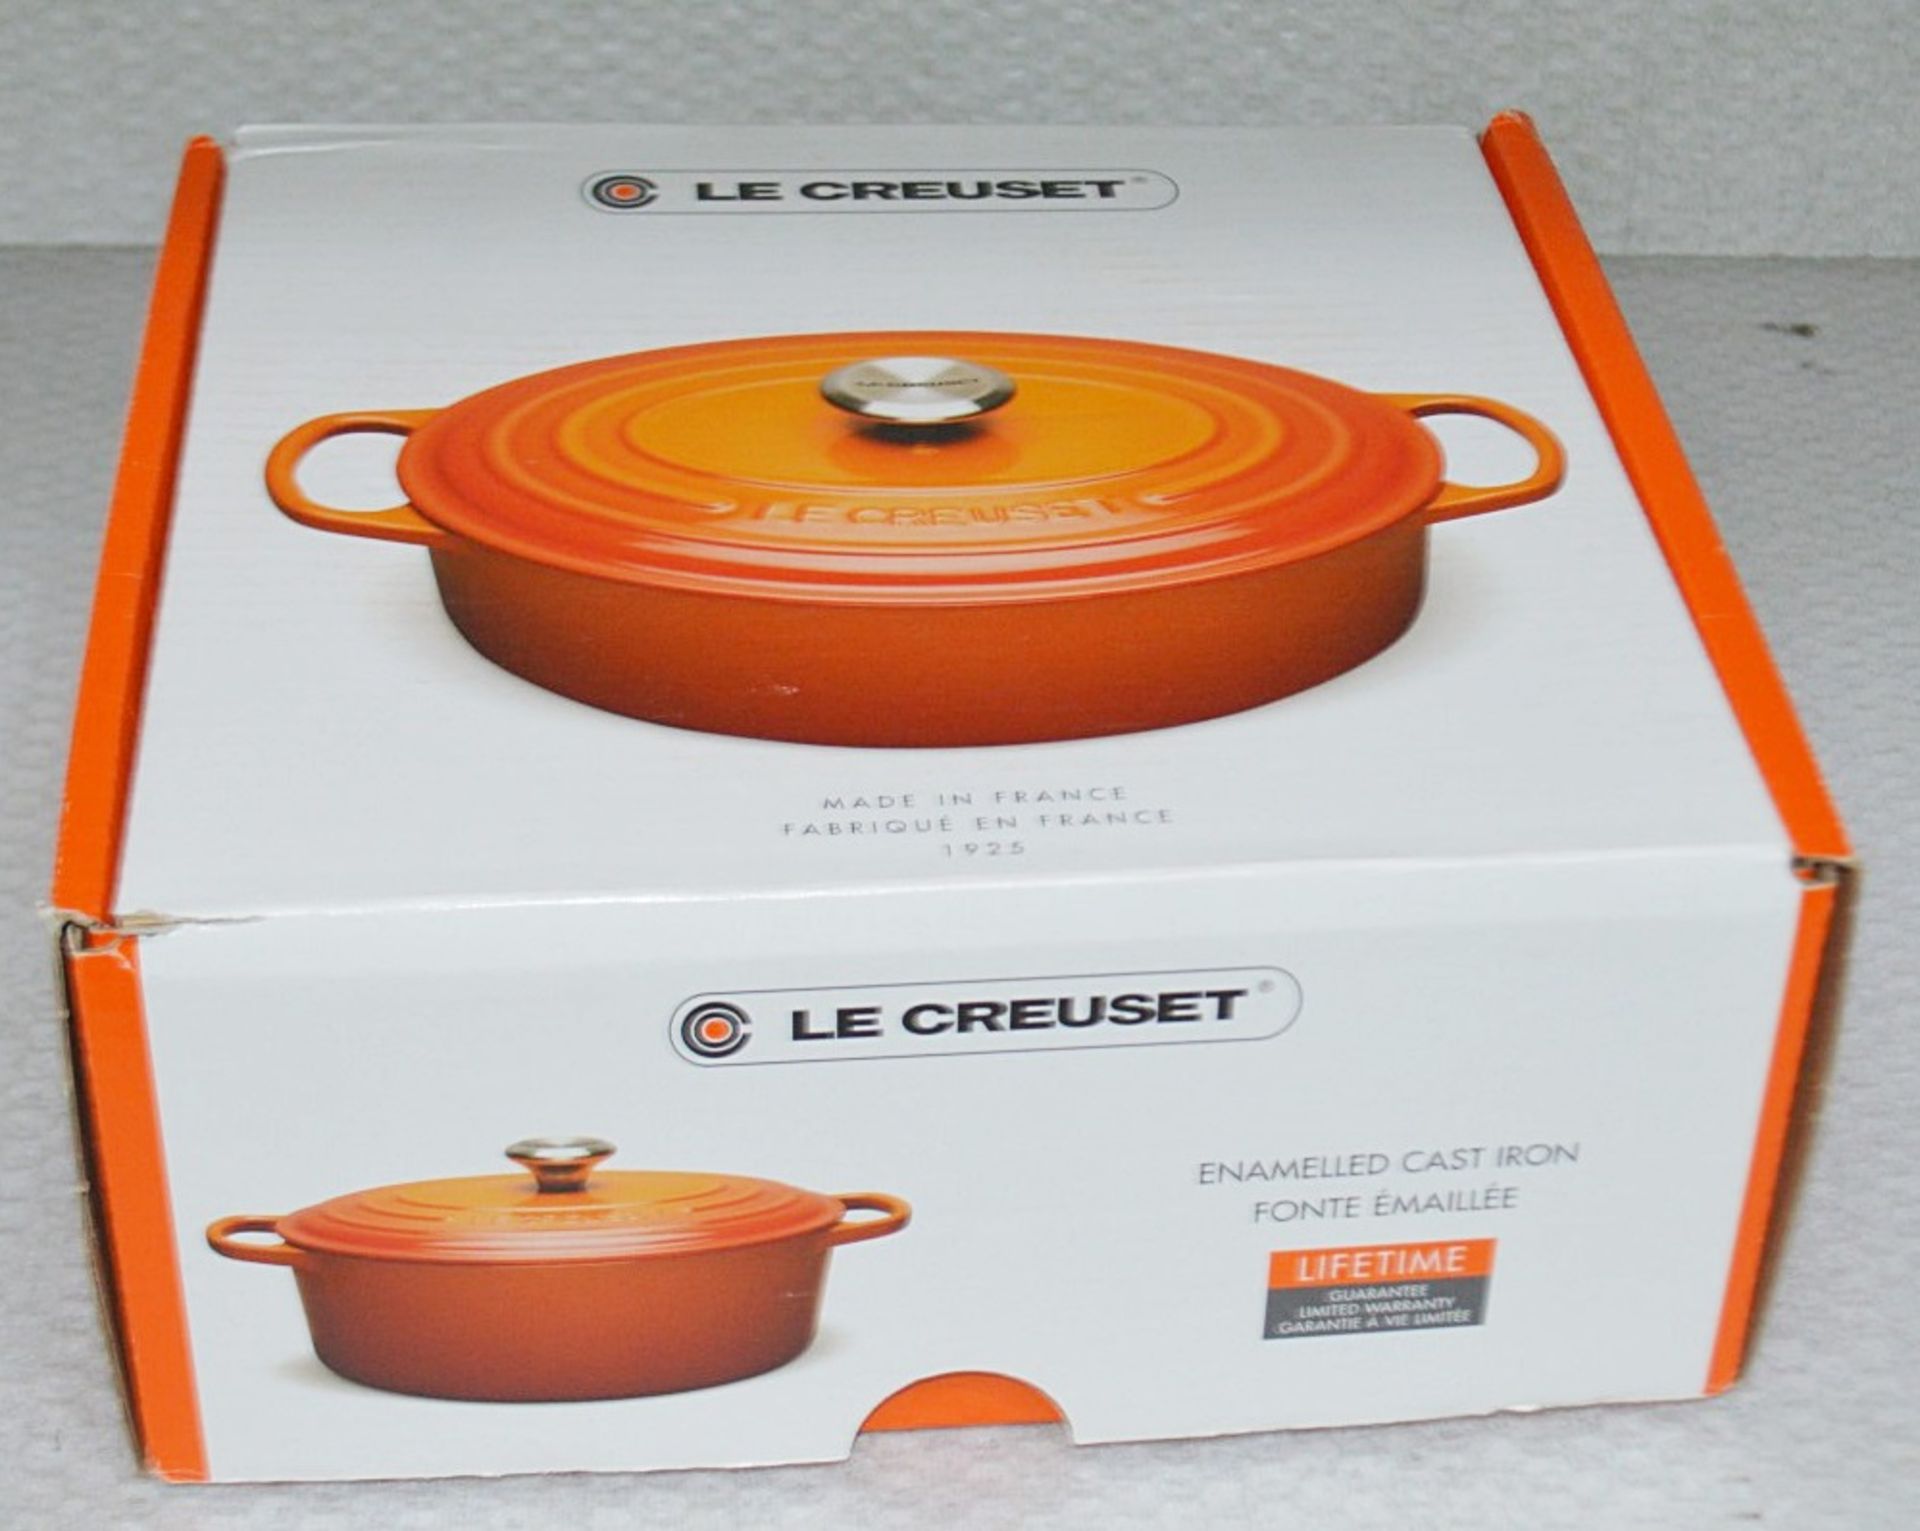 1 x LE CREUSET Signature Cast Iron Oval Casserole Dish With Lid In Volcanique Flame Orange ( - Image 2 of 9